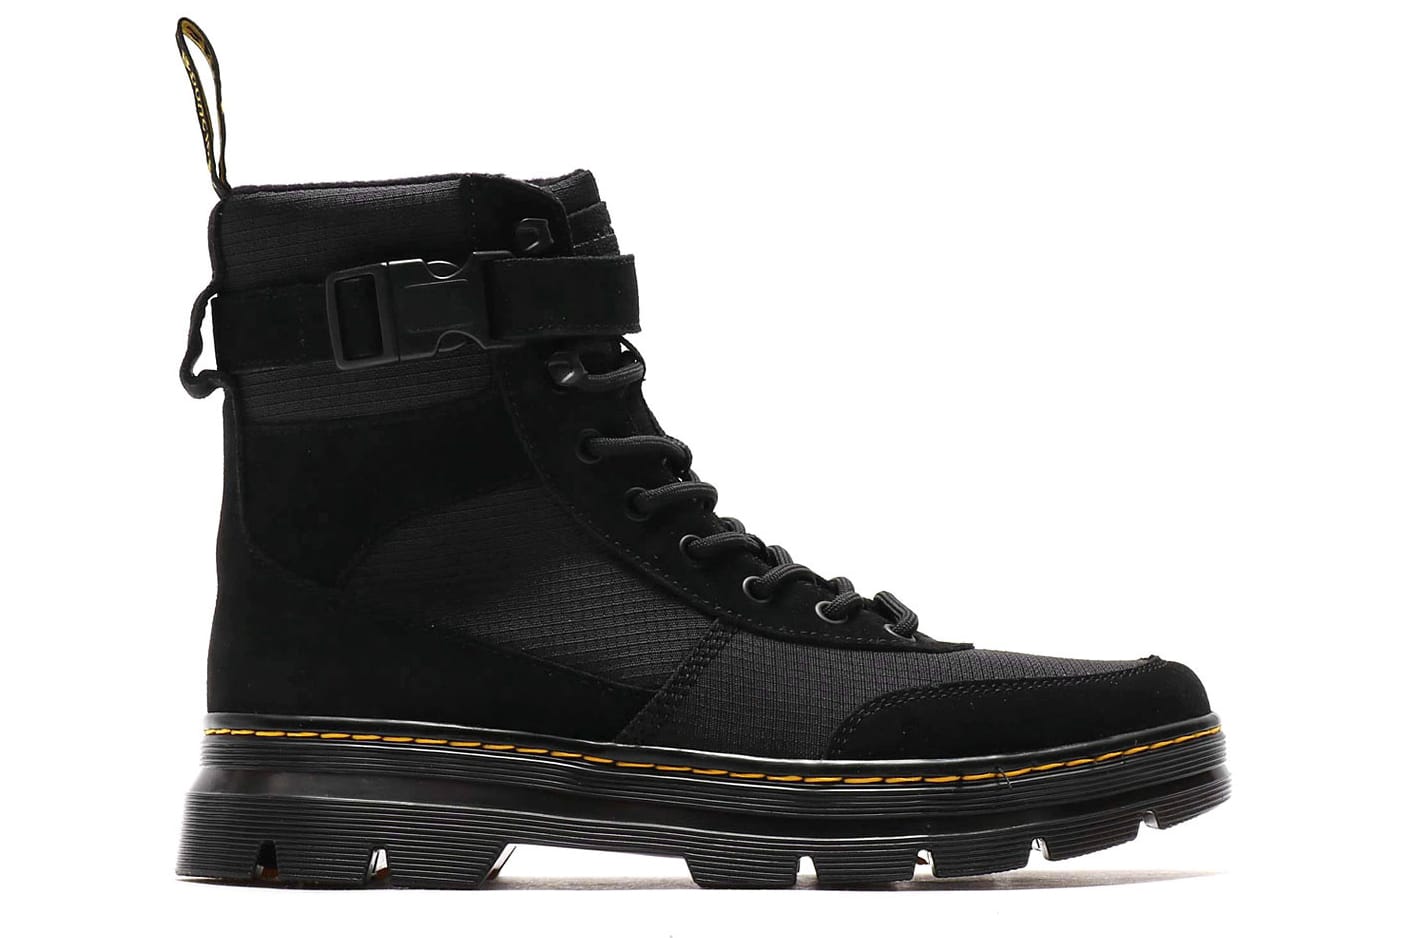 atmos LAB x Dr. Martens Tract Combs Boots Collab | HYPEBEAST